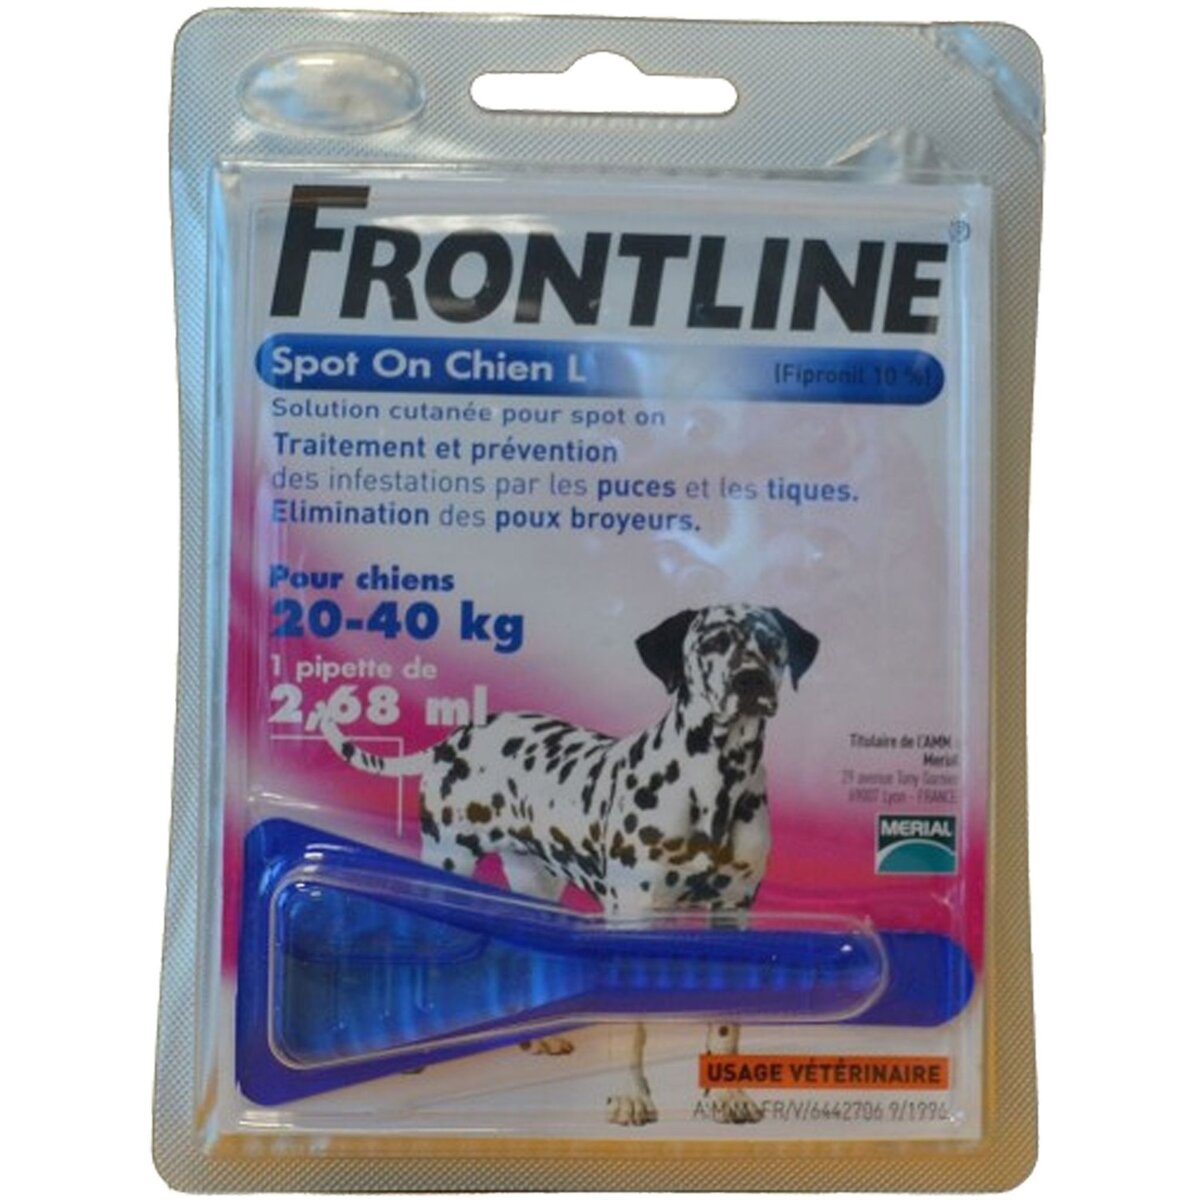 Frontline spot on chien large pipette x1 -18g